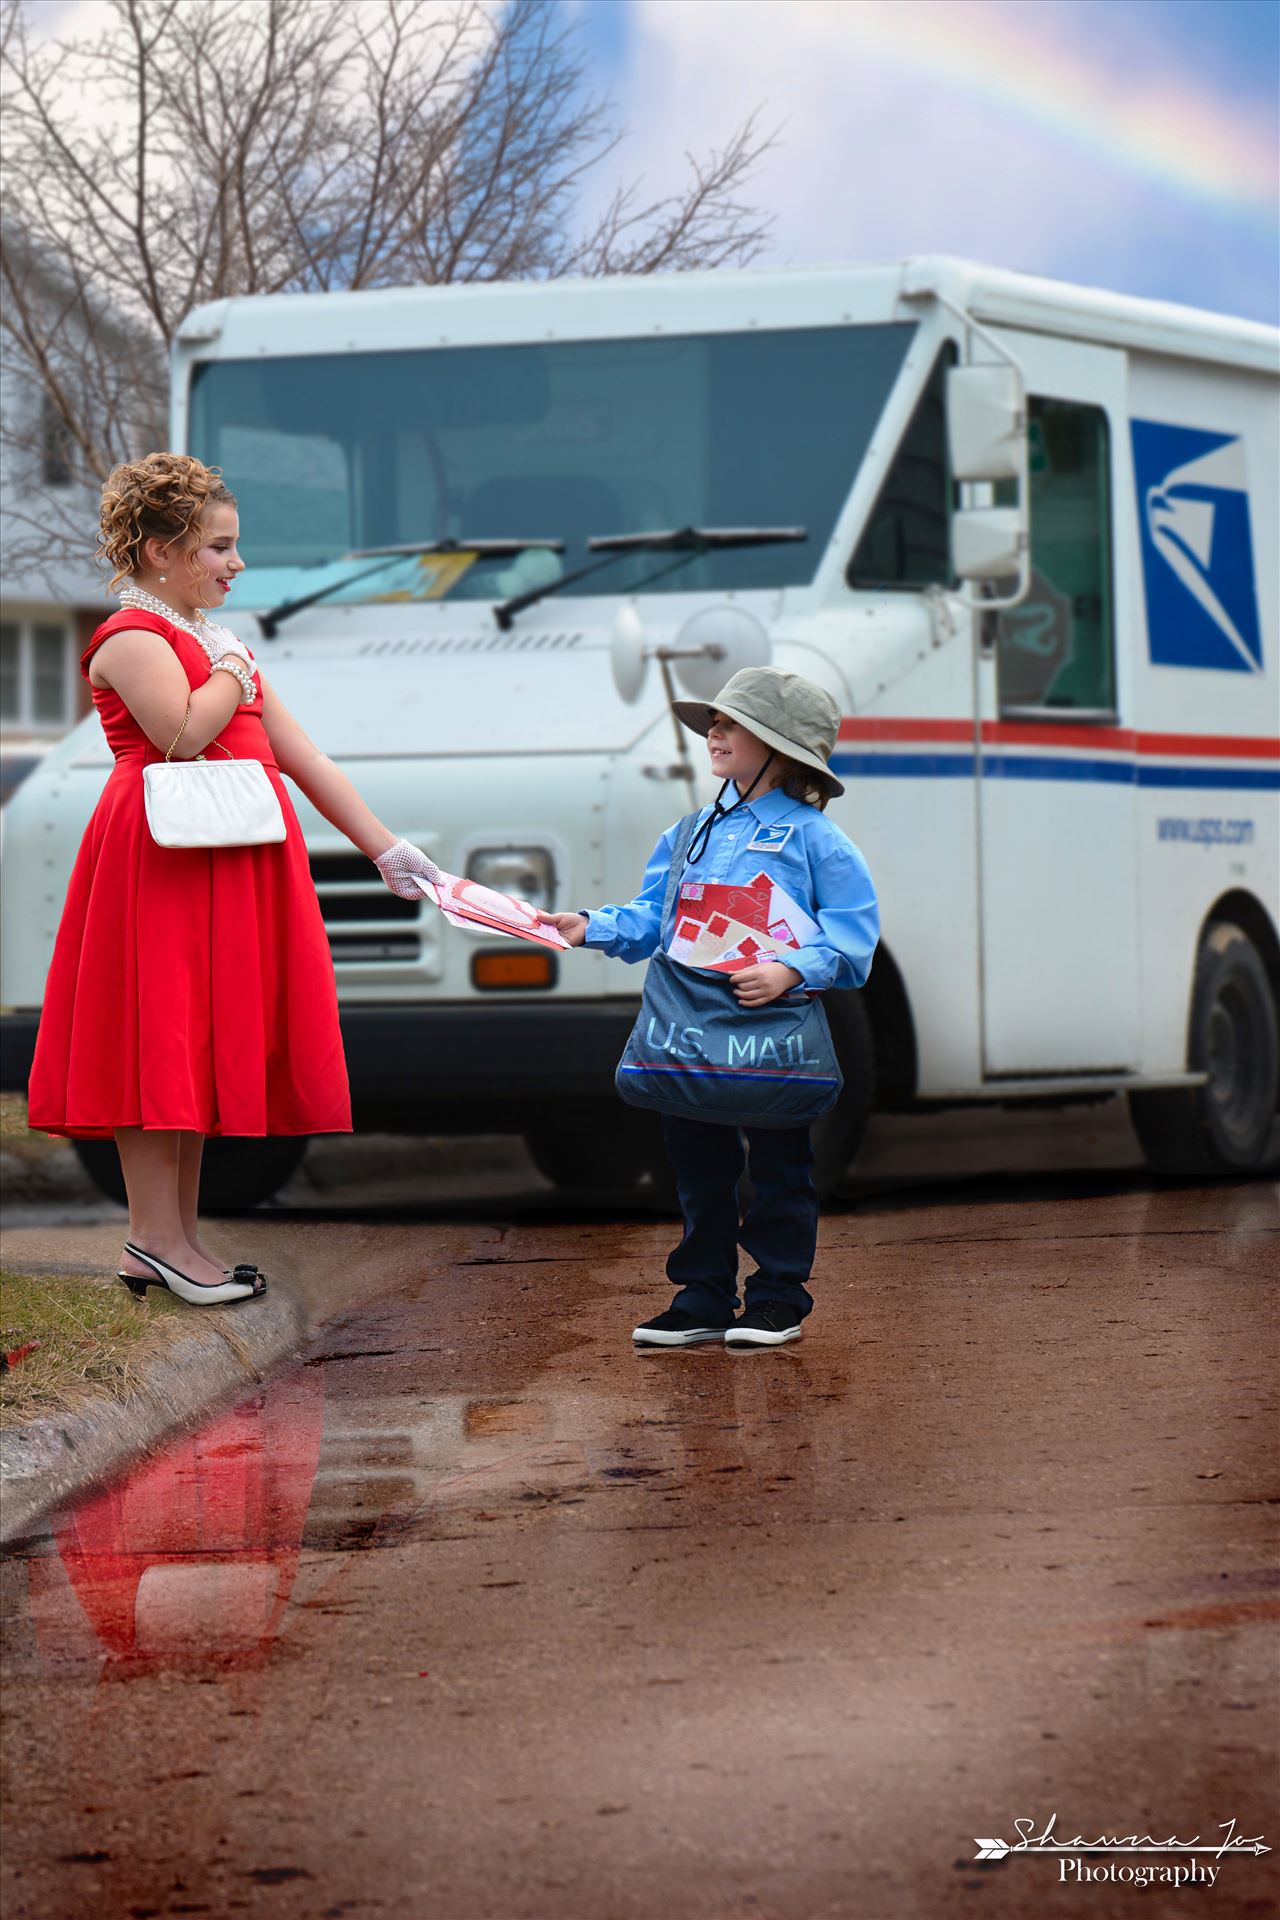 postman-1editWATERMARK.jpg - special delivery! You've got mail by Shawna Jo Photography